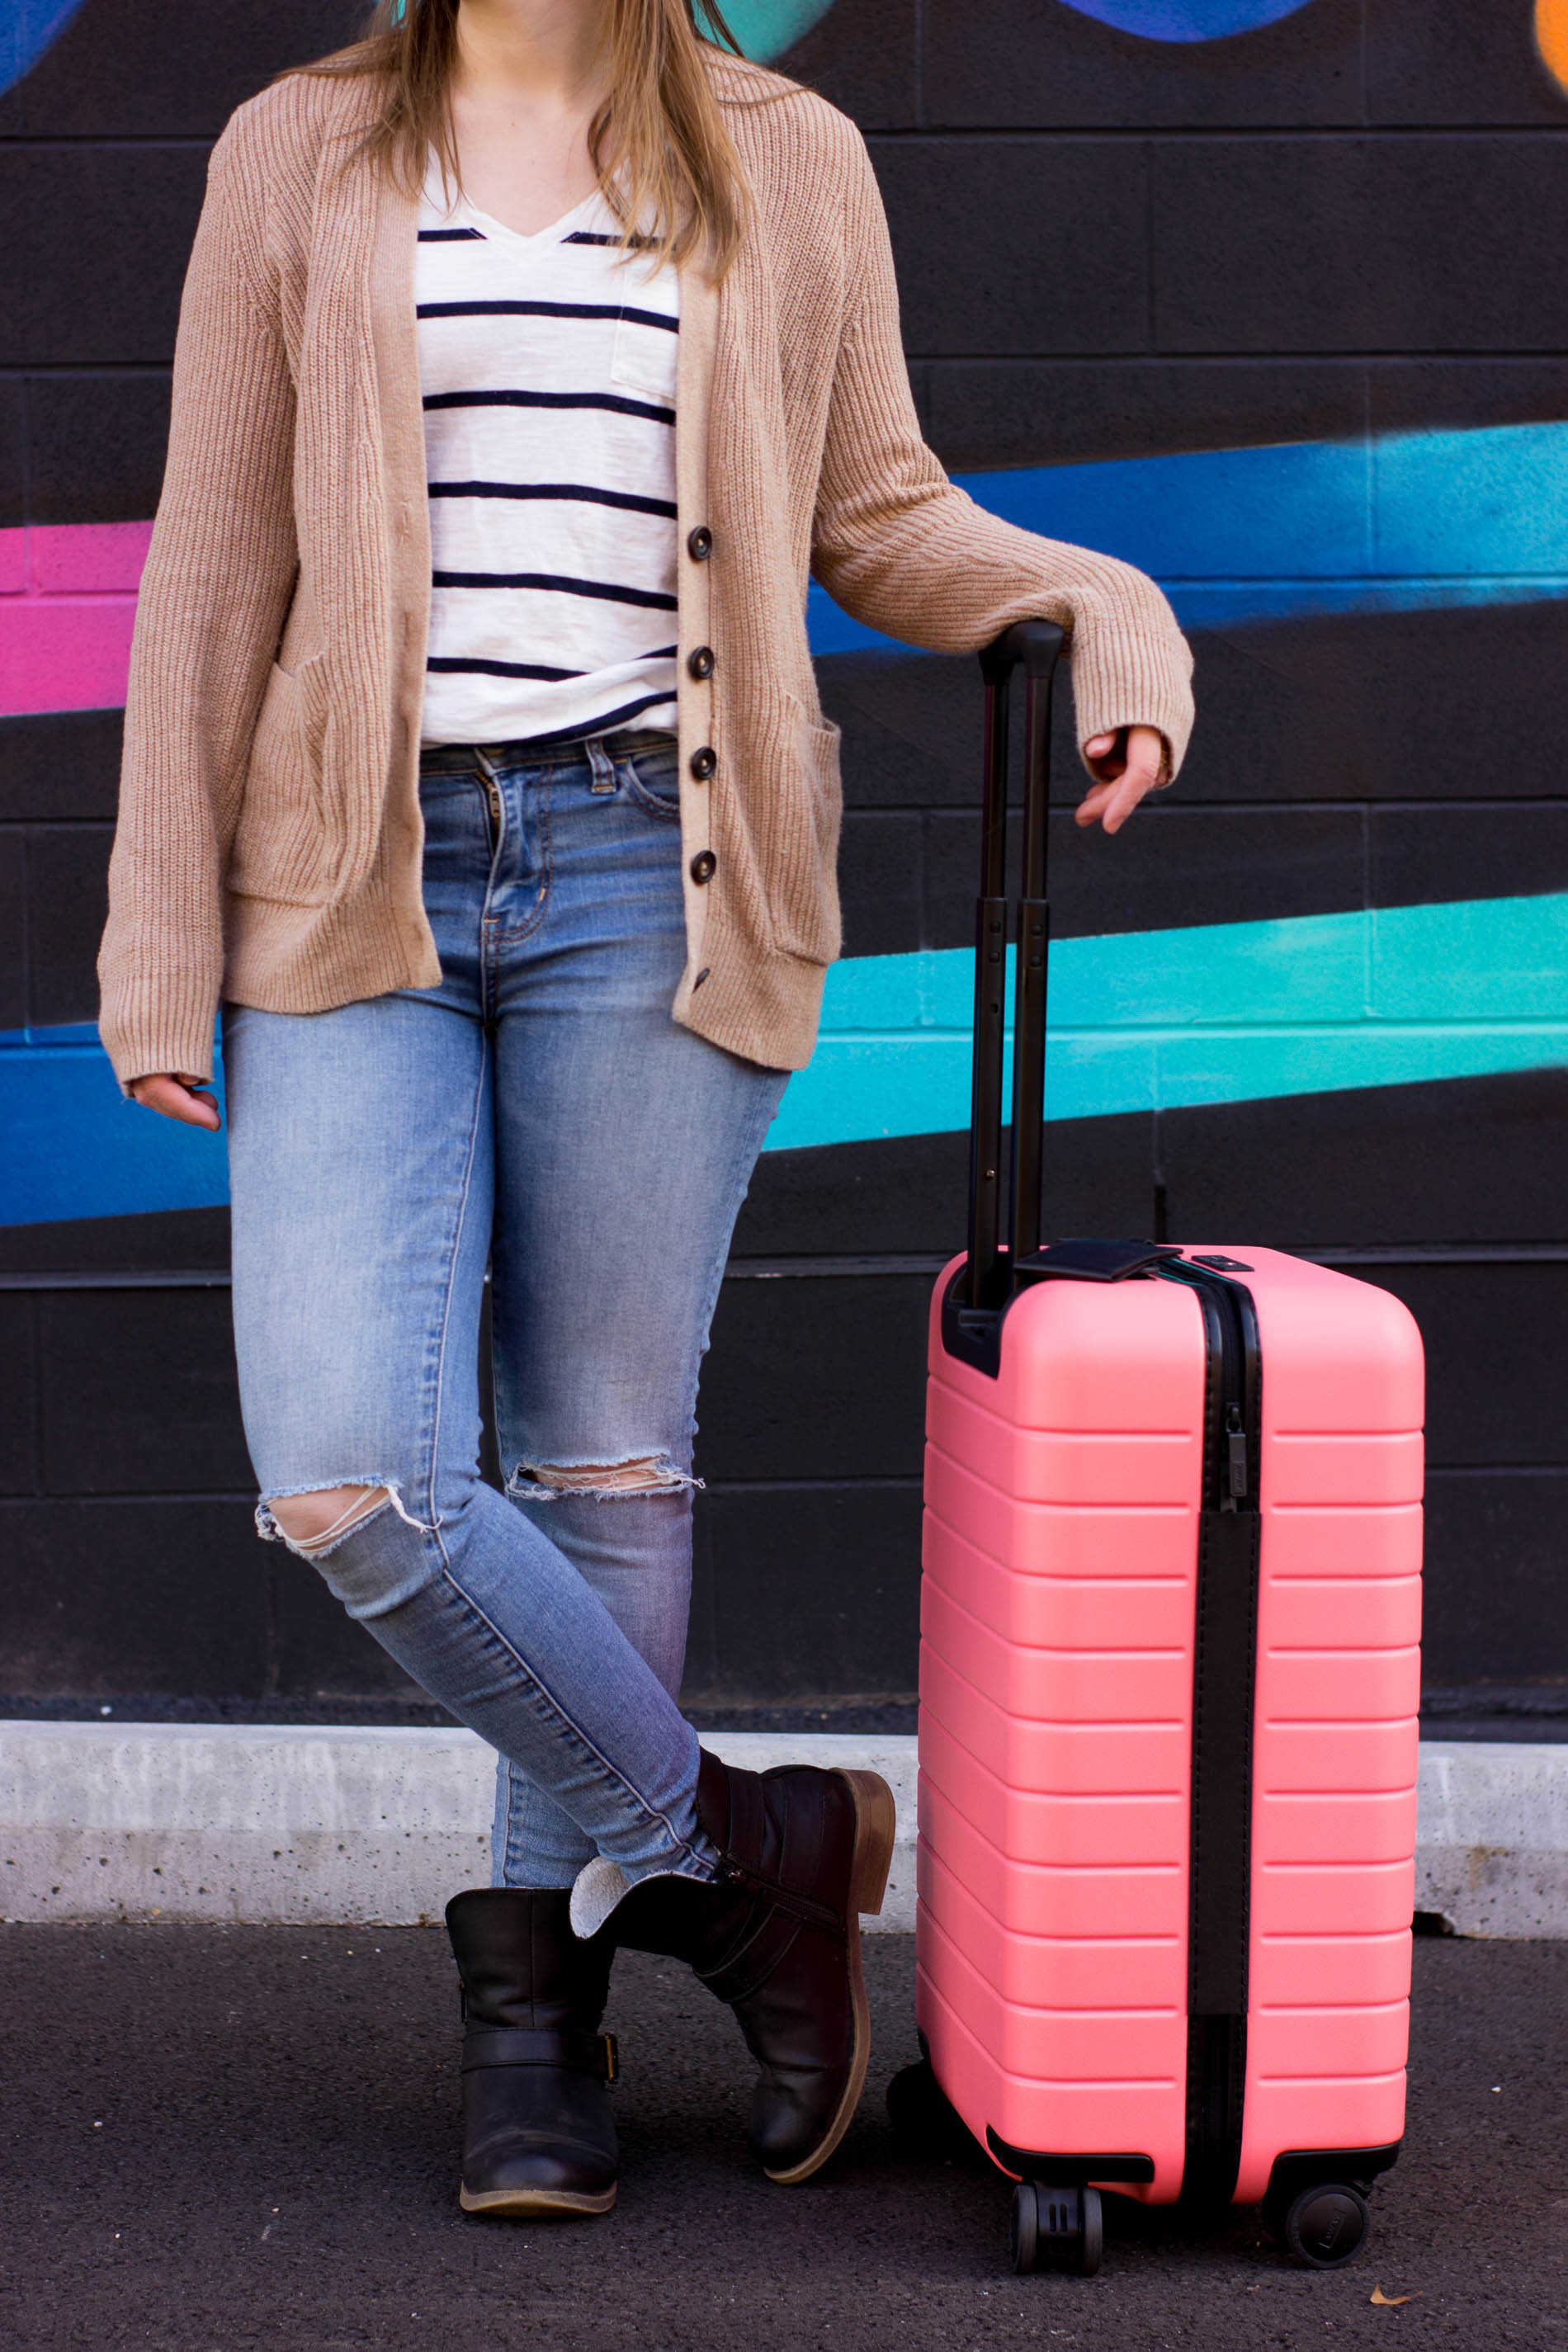 The Perfect Travel Outfit | Something Good, @danaerinw , coral away suitcase, moto boots, bigger carry on, away suitcases